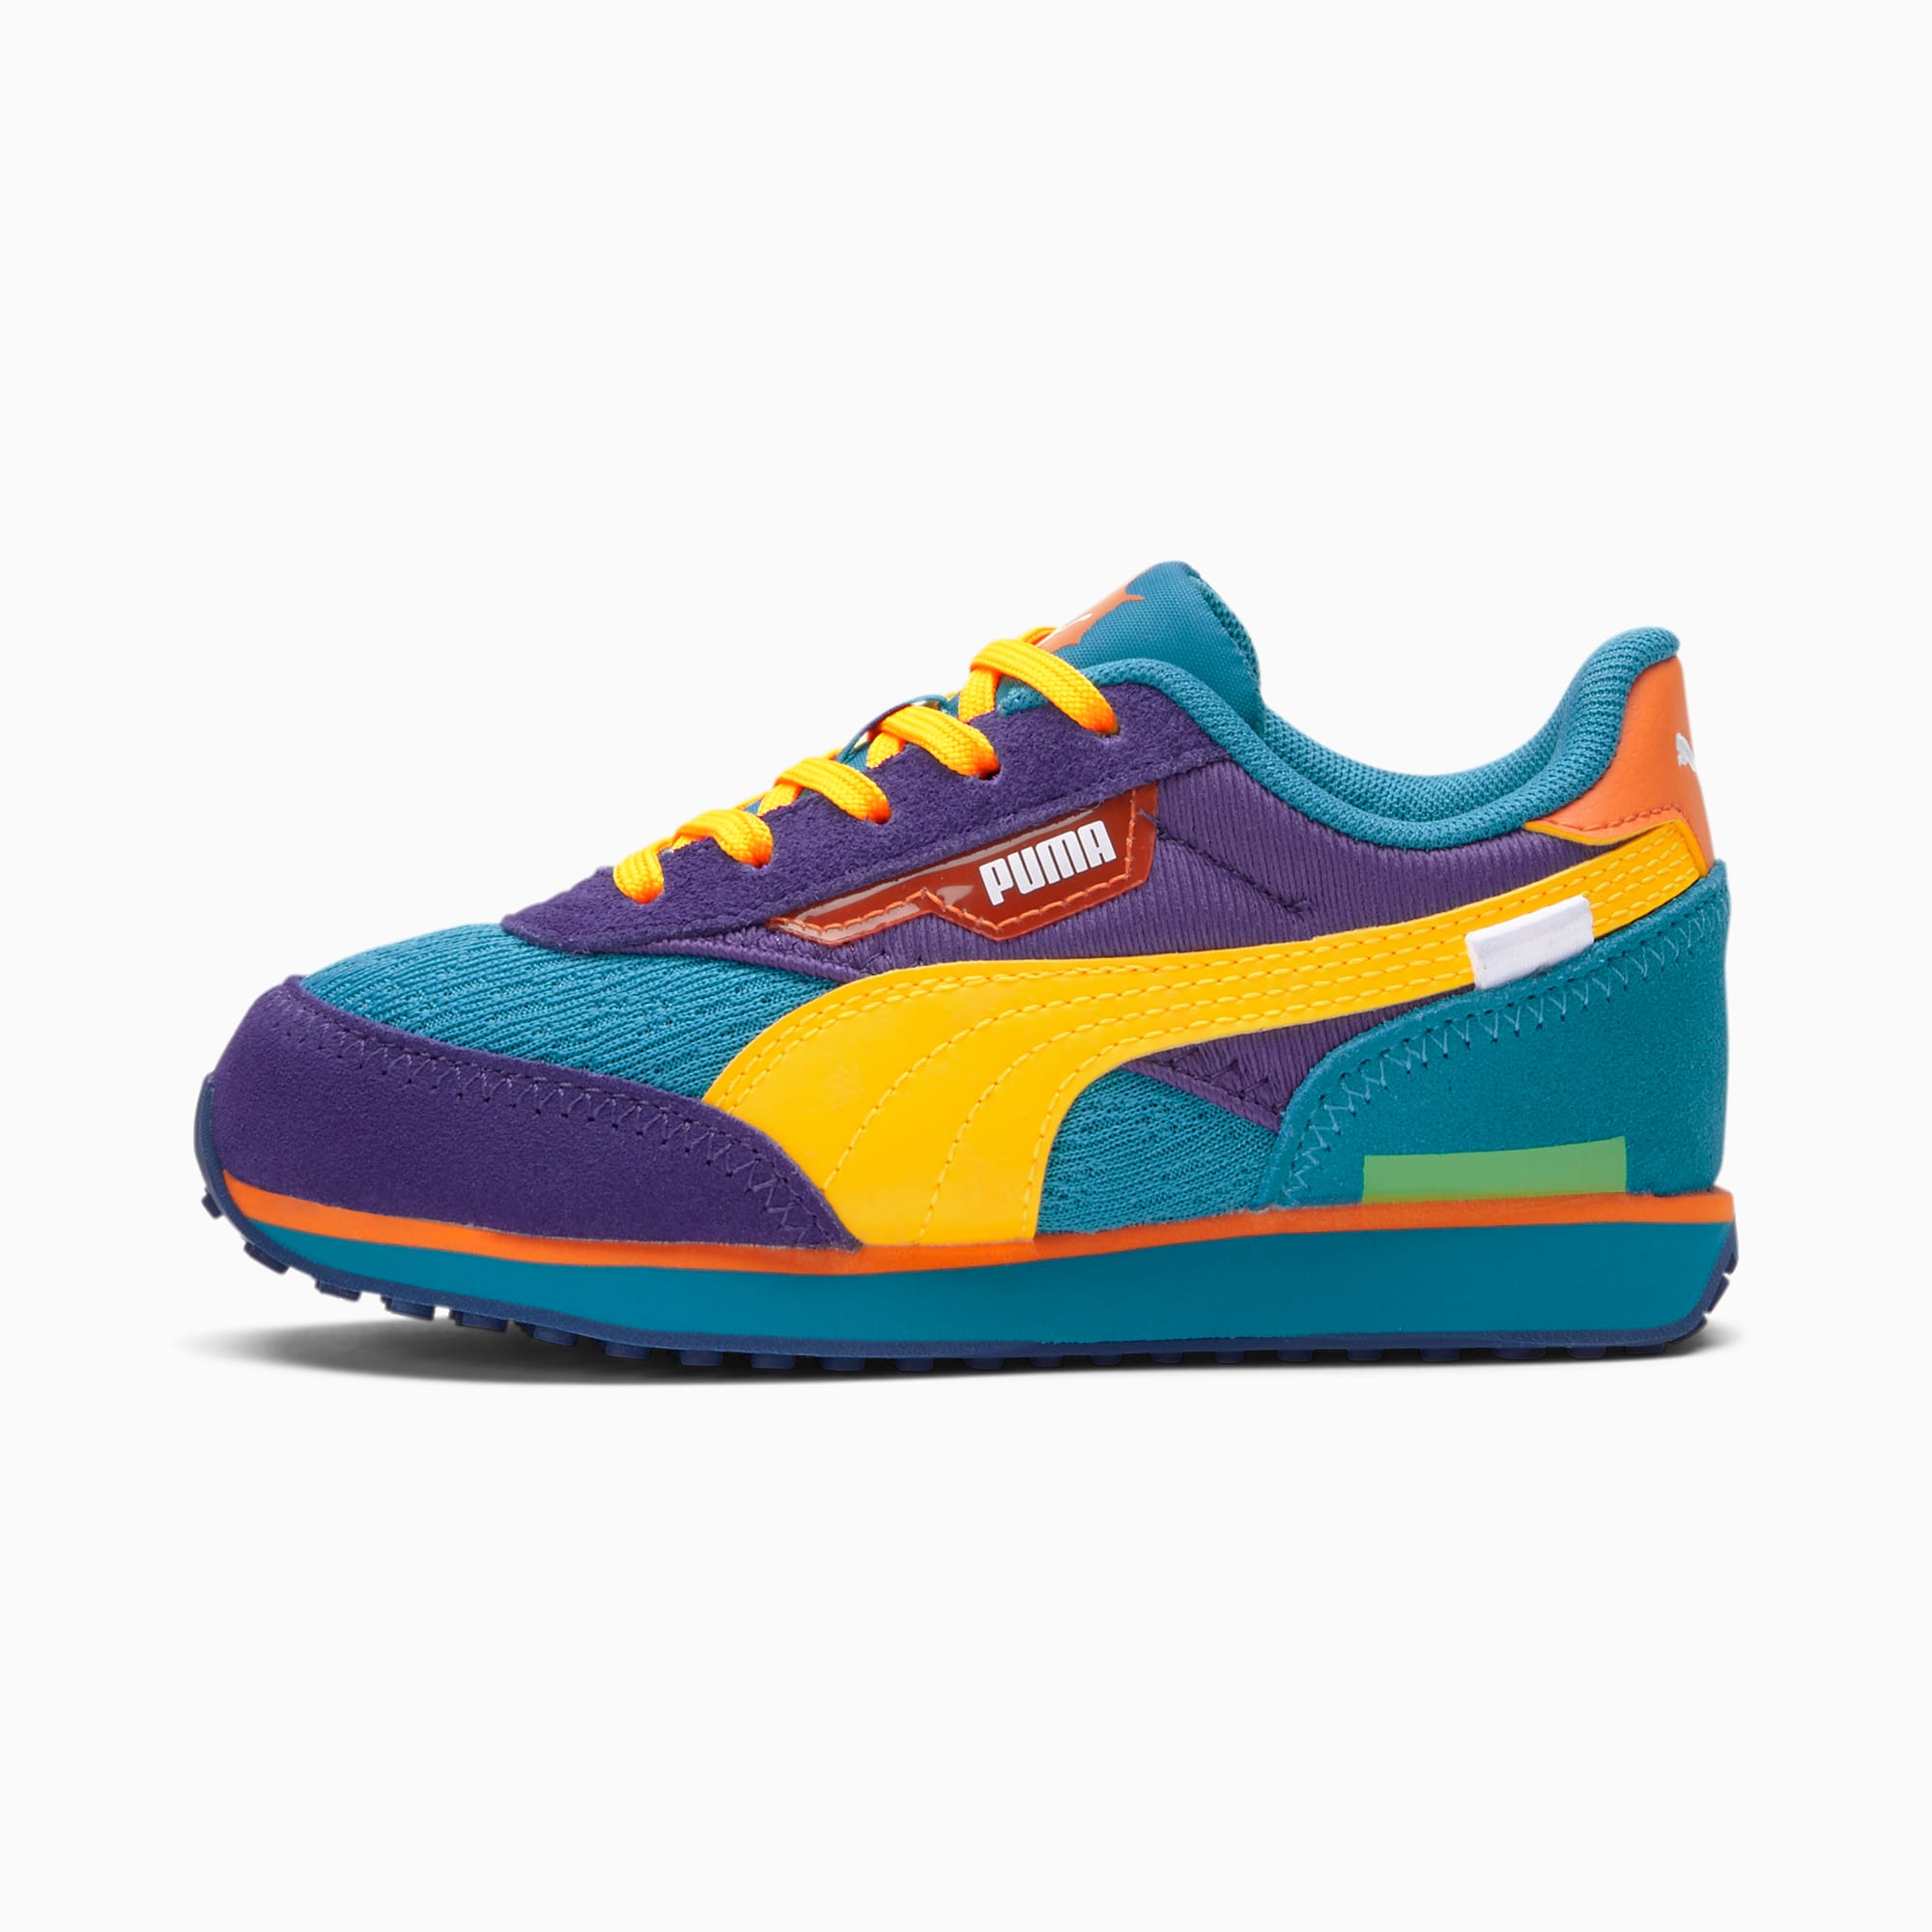 Puma X Rugrats Future Rider Little Kids, Please Take Your Shoes Off Rugrats Meaning